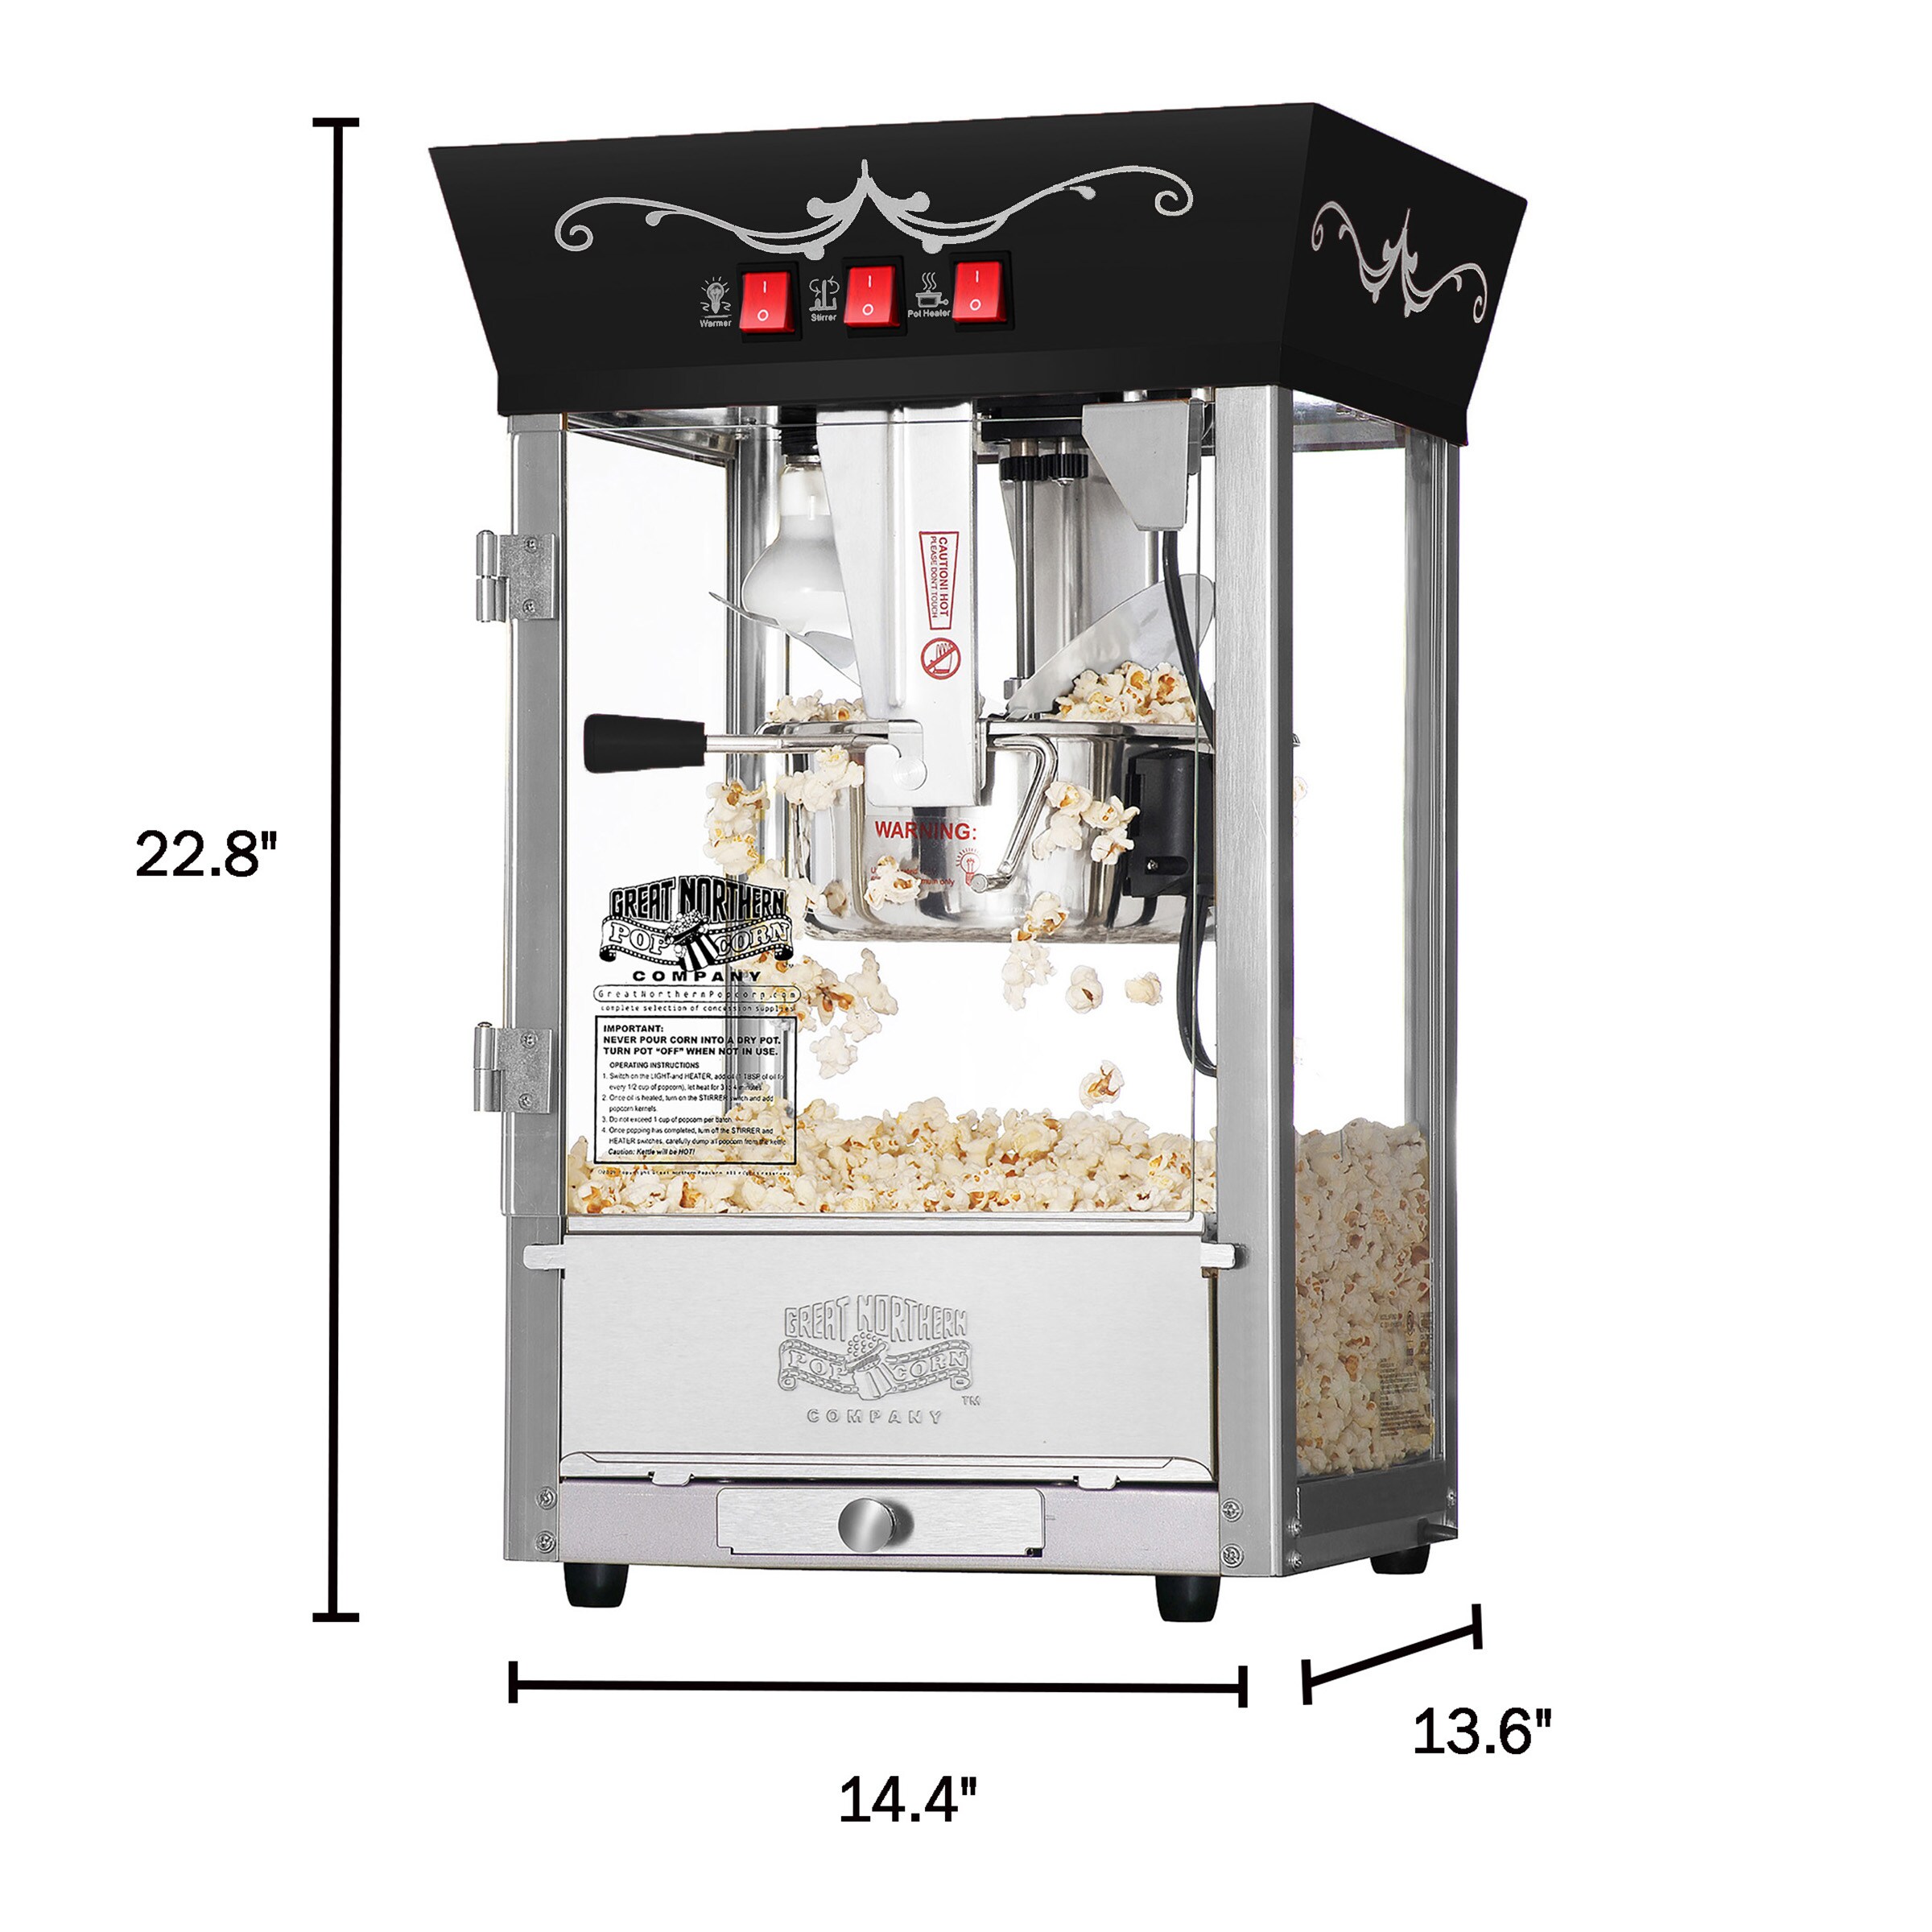 VEVOR Commercial Popcorn Machine, 8 Oz Kettle, 850 W Countertop Popcorn  Maker for 48 Cups per Batch, Theater Style Popper with 3-Switch Control  Steel